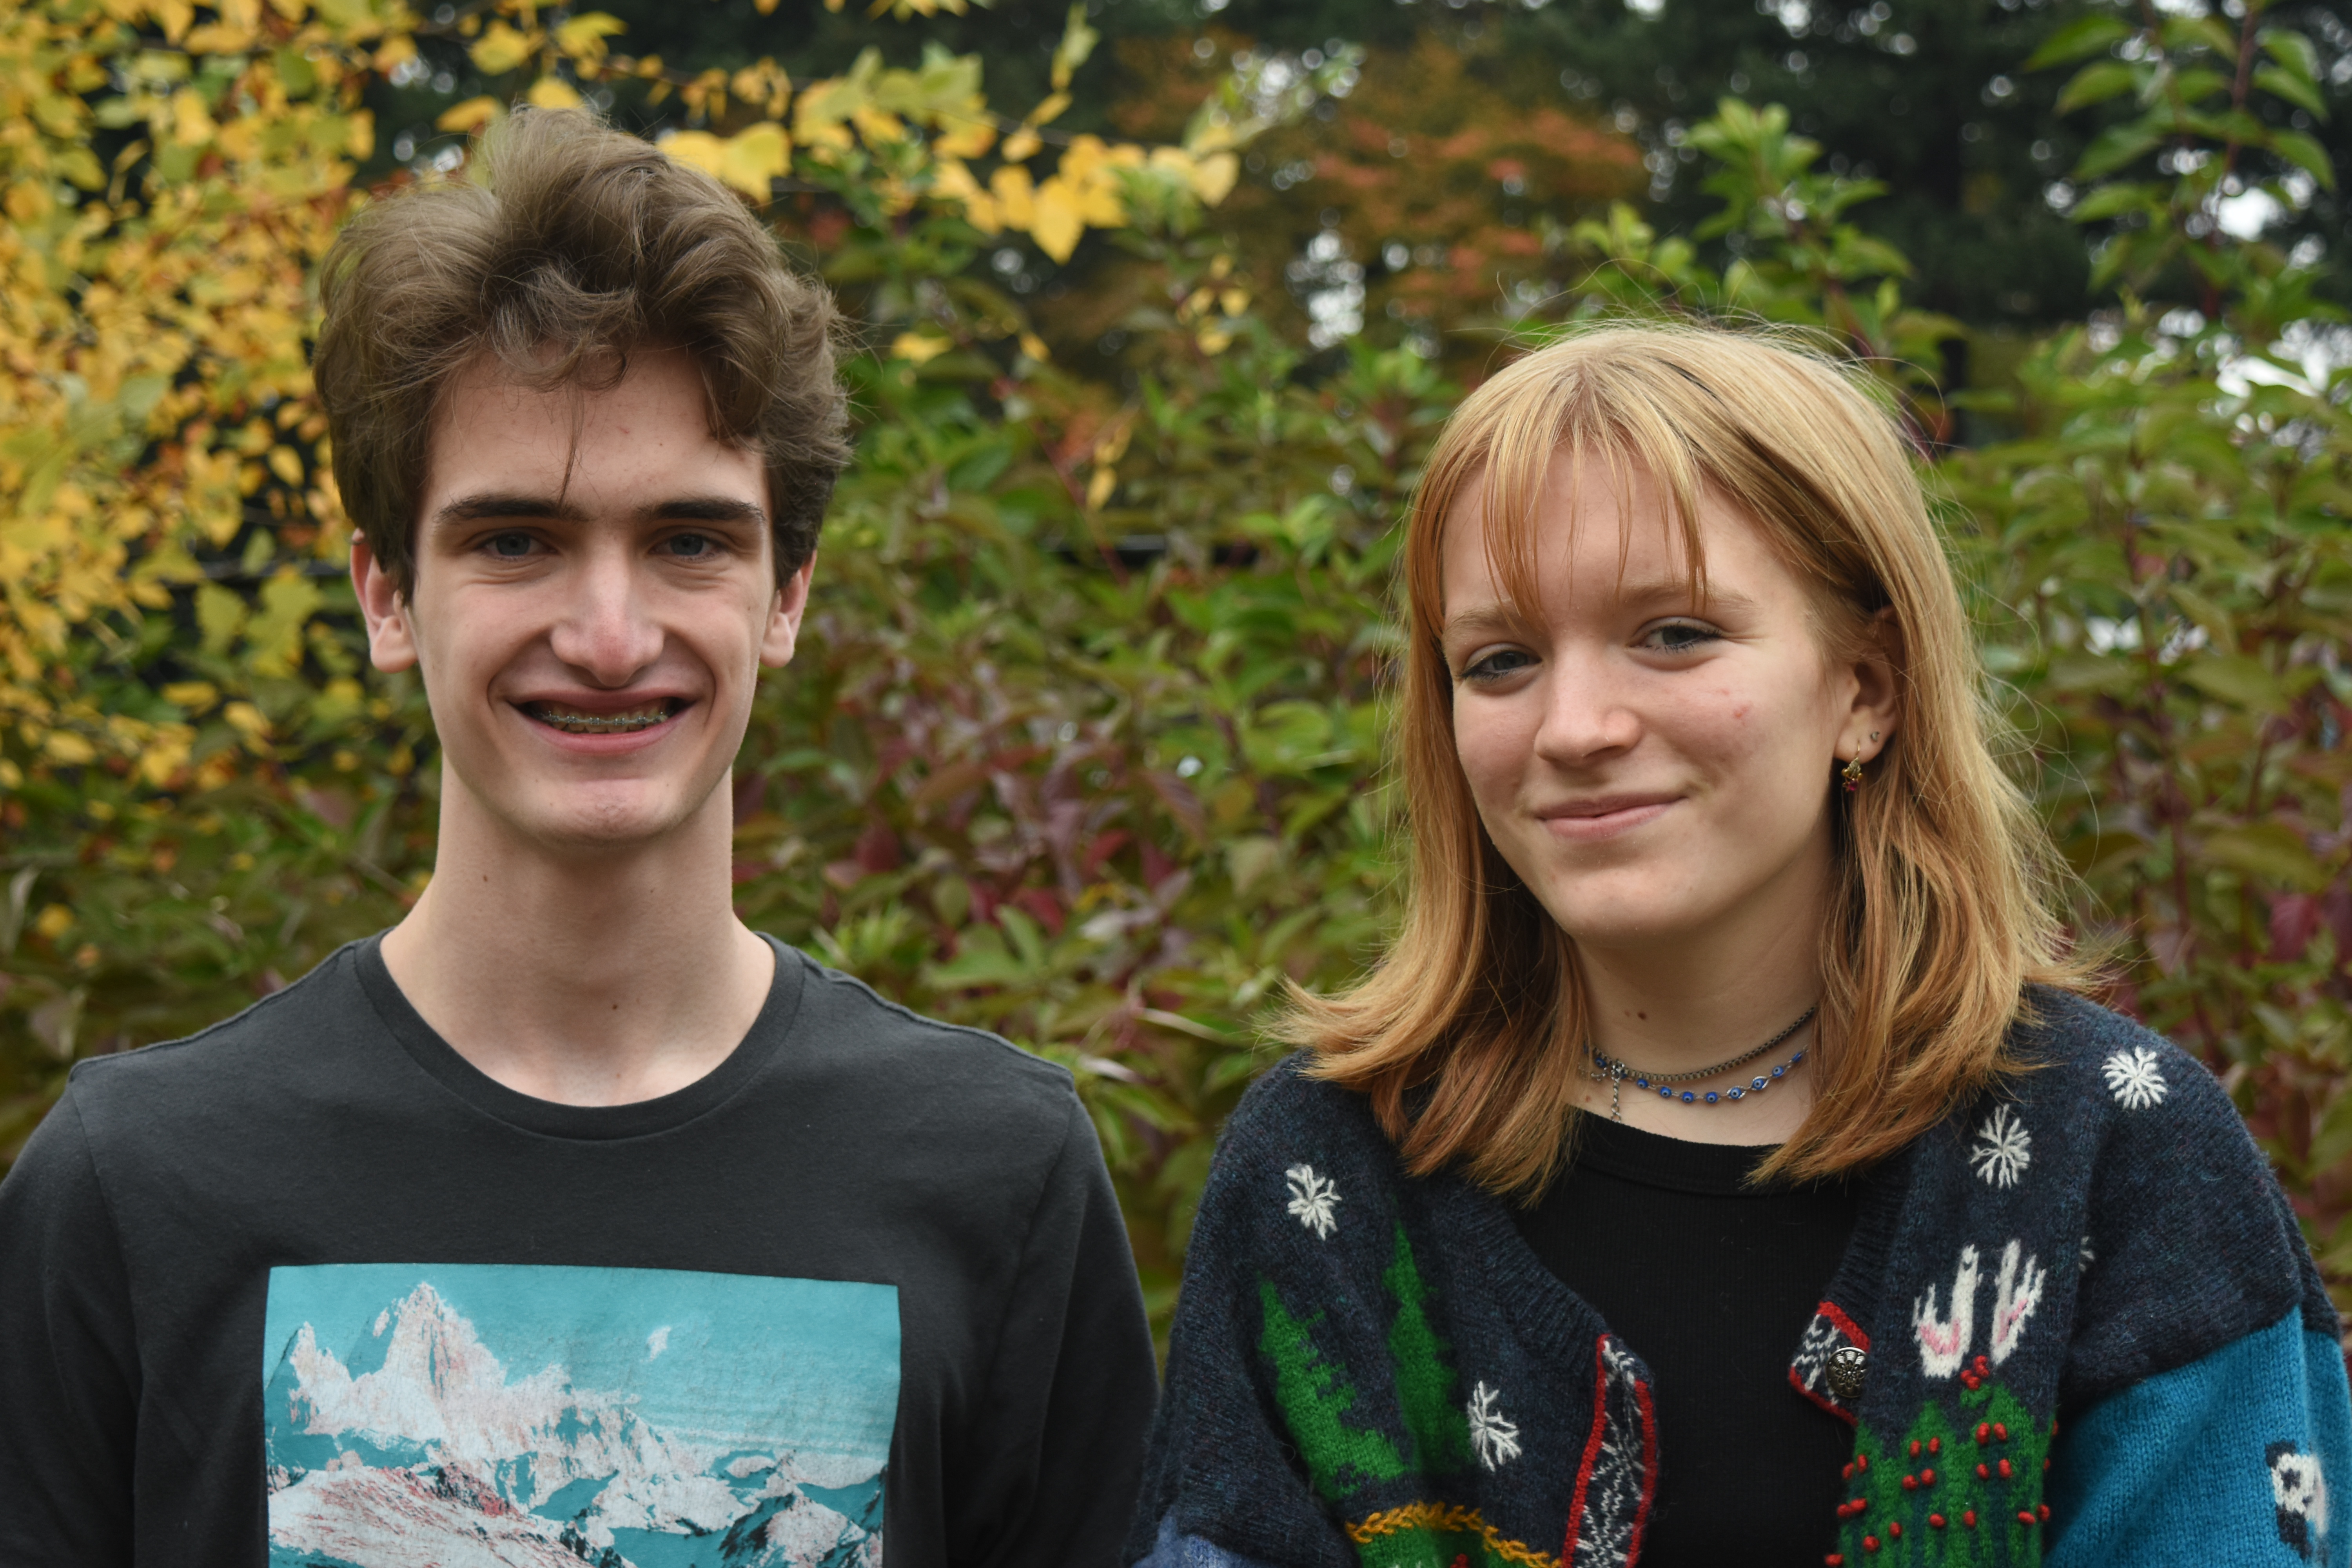 Two white teenagers, one with short brown hair and another with strawberry blonde hair and bangs, stand in front of a wall of greenery, smiling. 